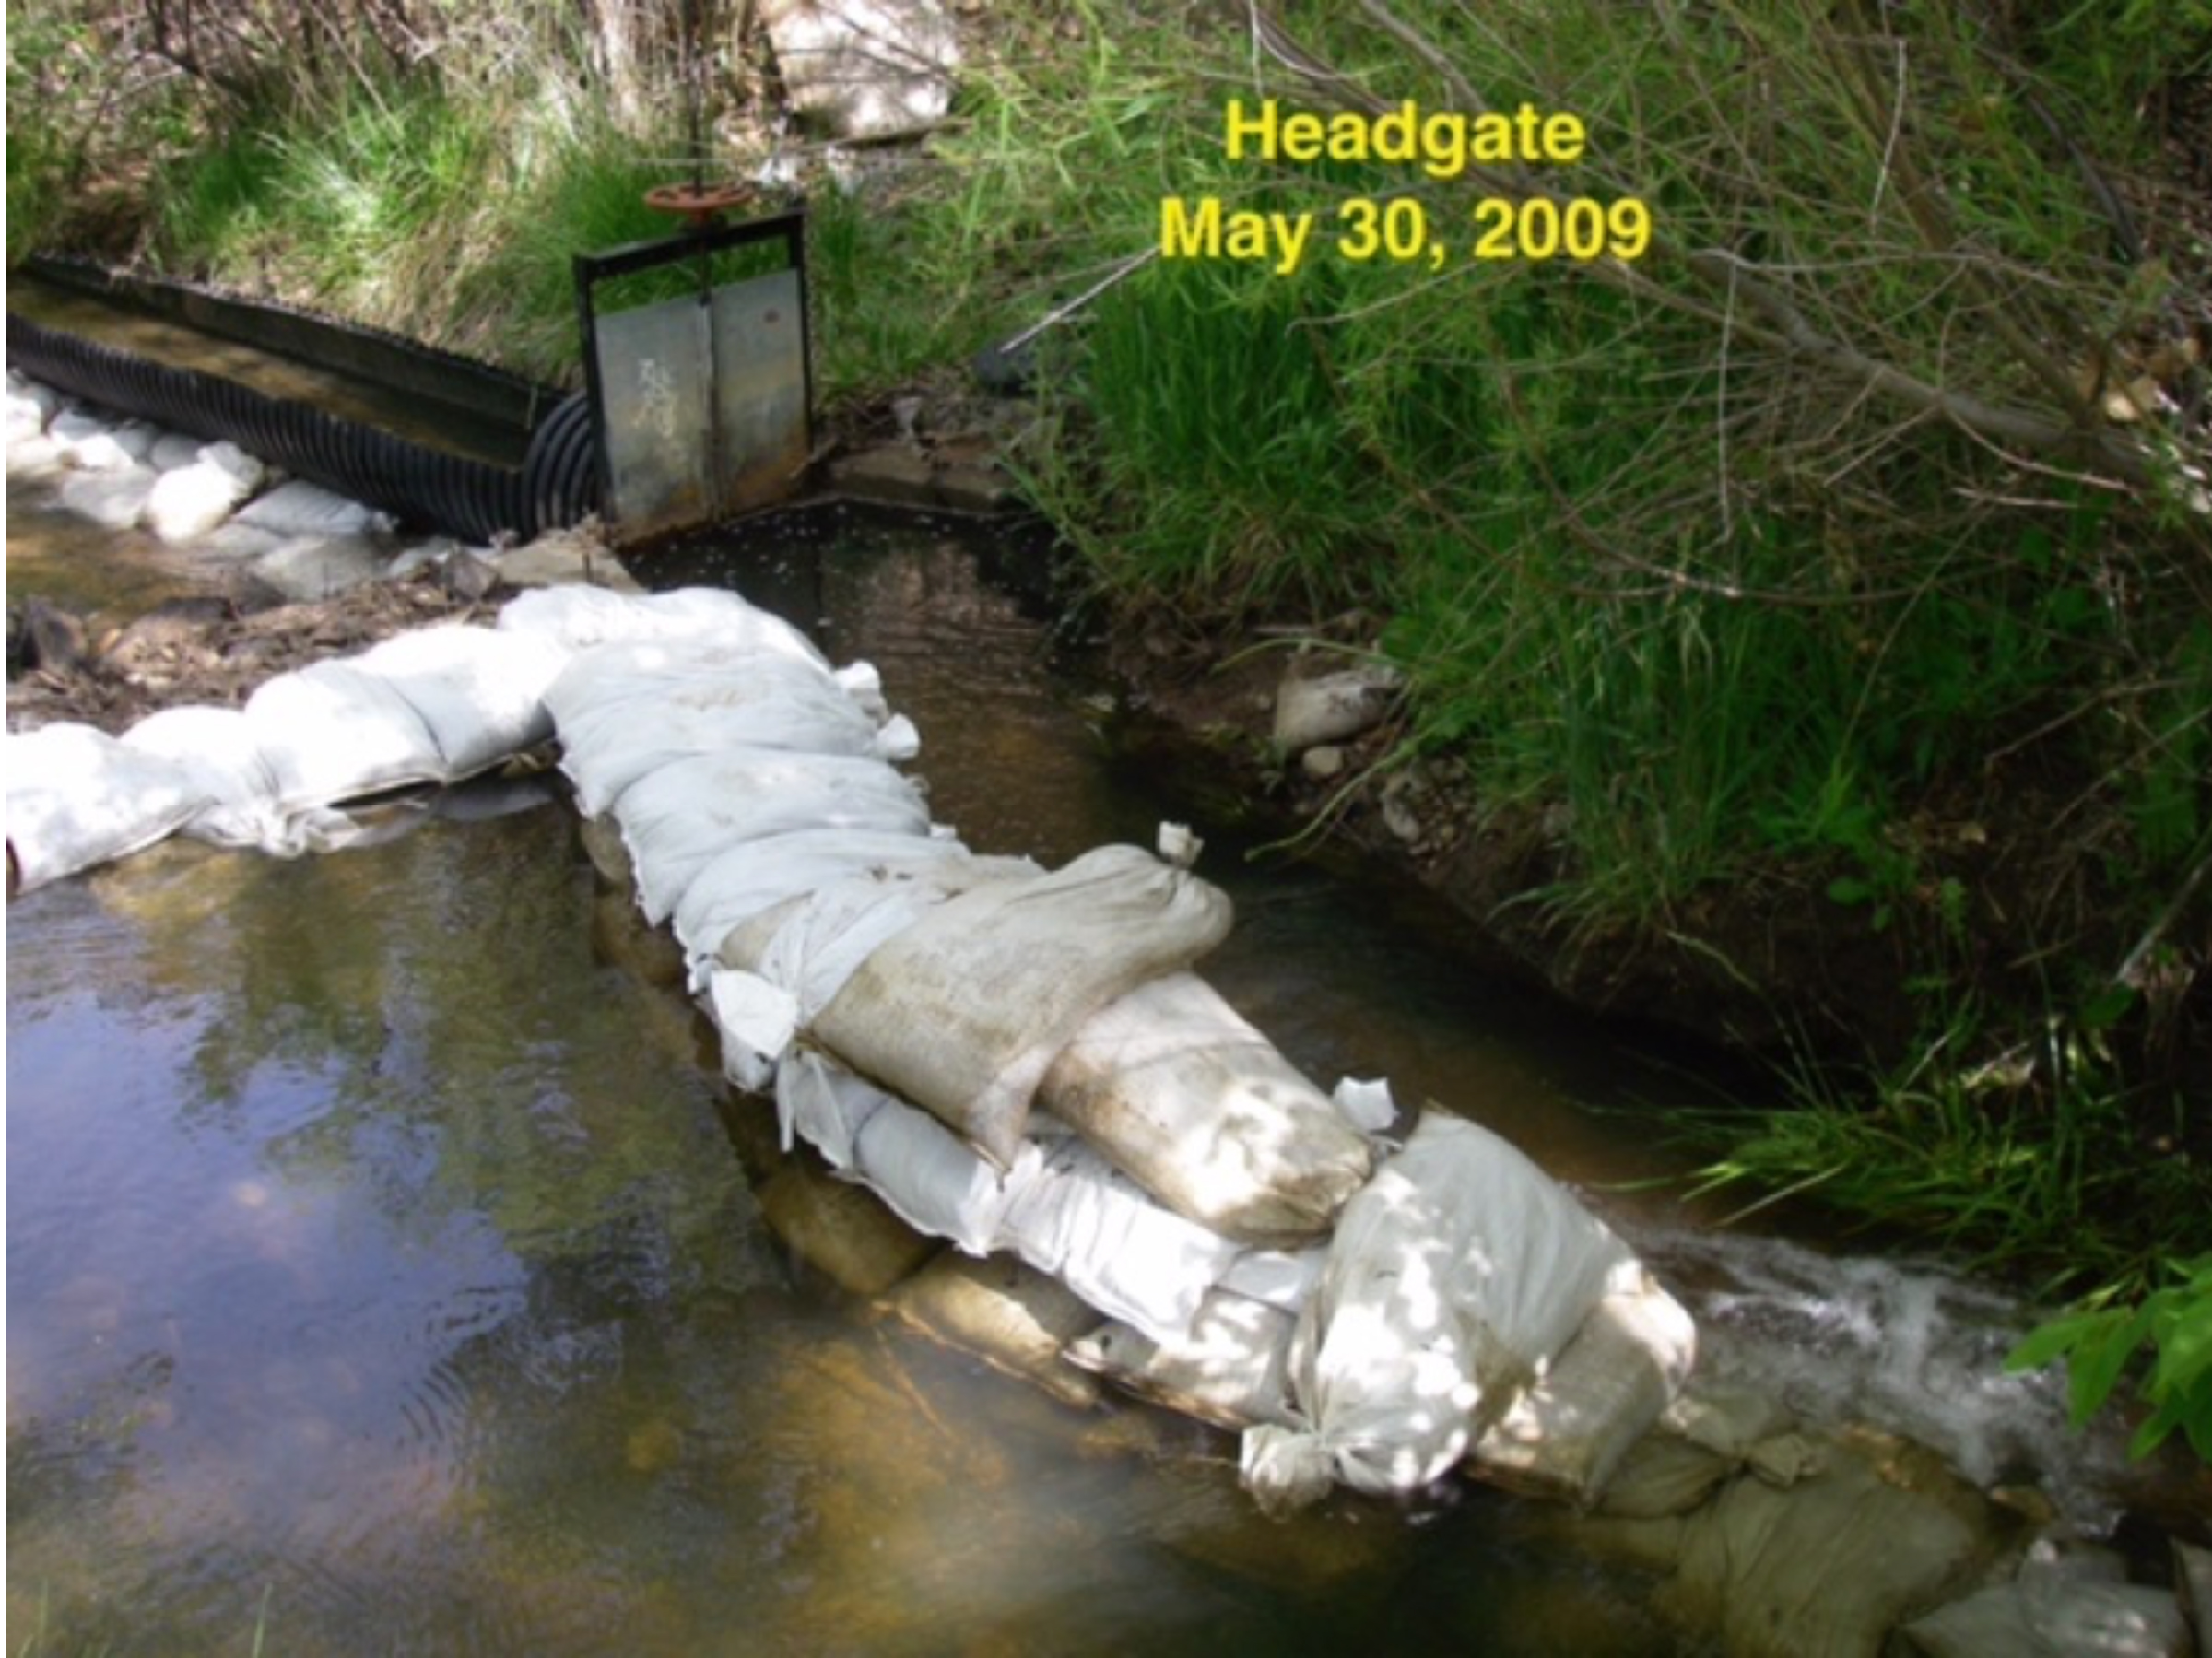  The diversion structure for the Acequia de la Muralla, showing the Santa Fe River in the front left, the sandbag wall, the headgate, and the opened culvert that is the beginning of the ditch. photo by B.C. Rimbeaux 